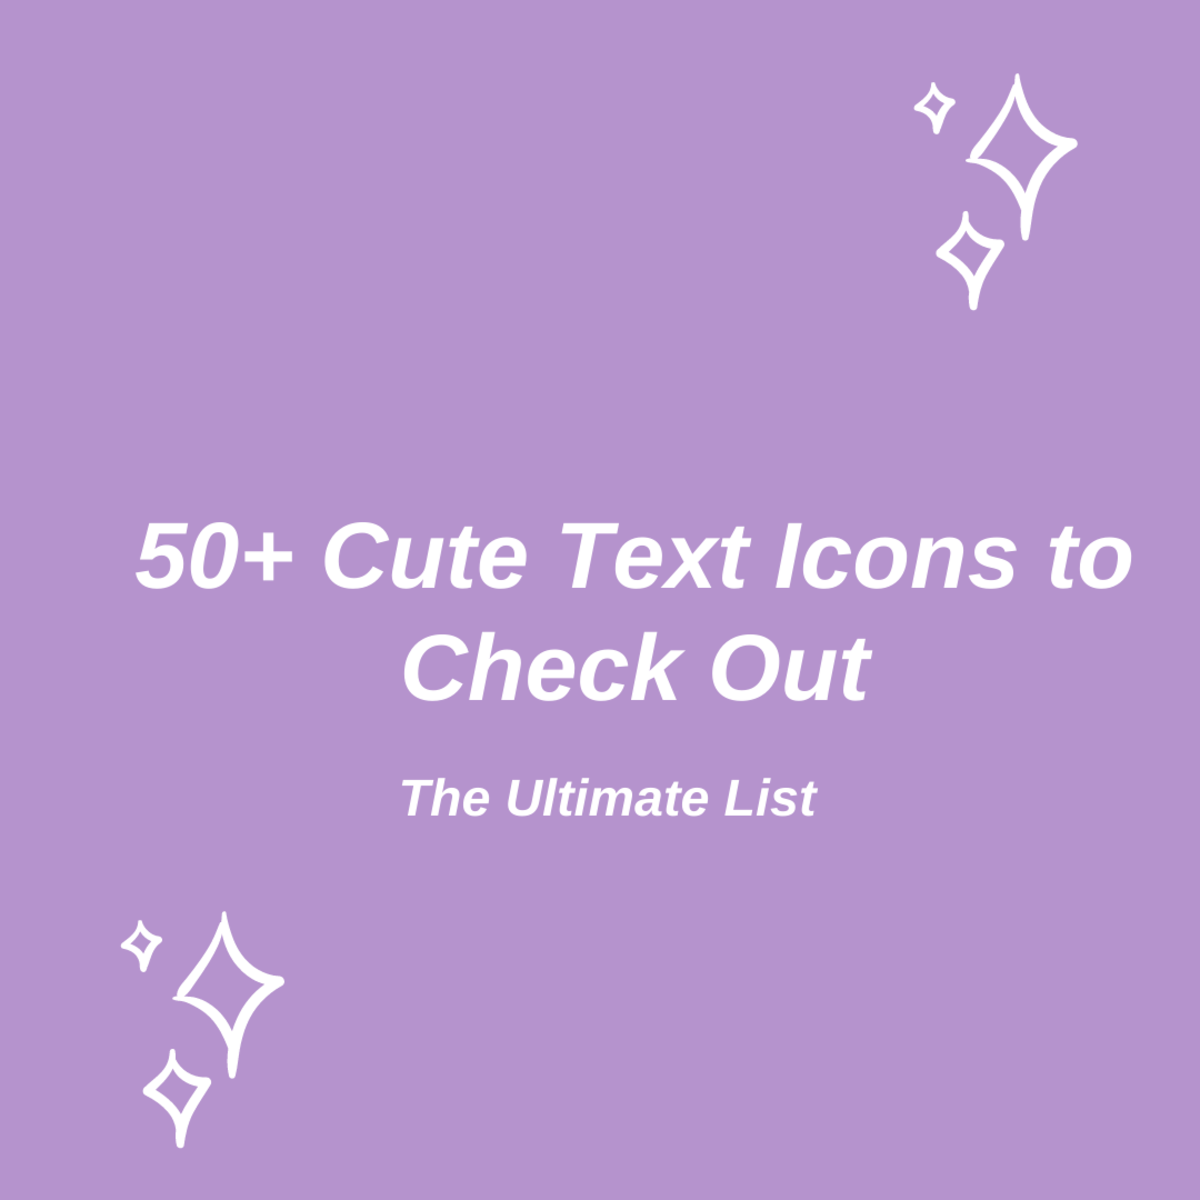 50+ Cute Text Icons to Check Out: The Ultimate List